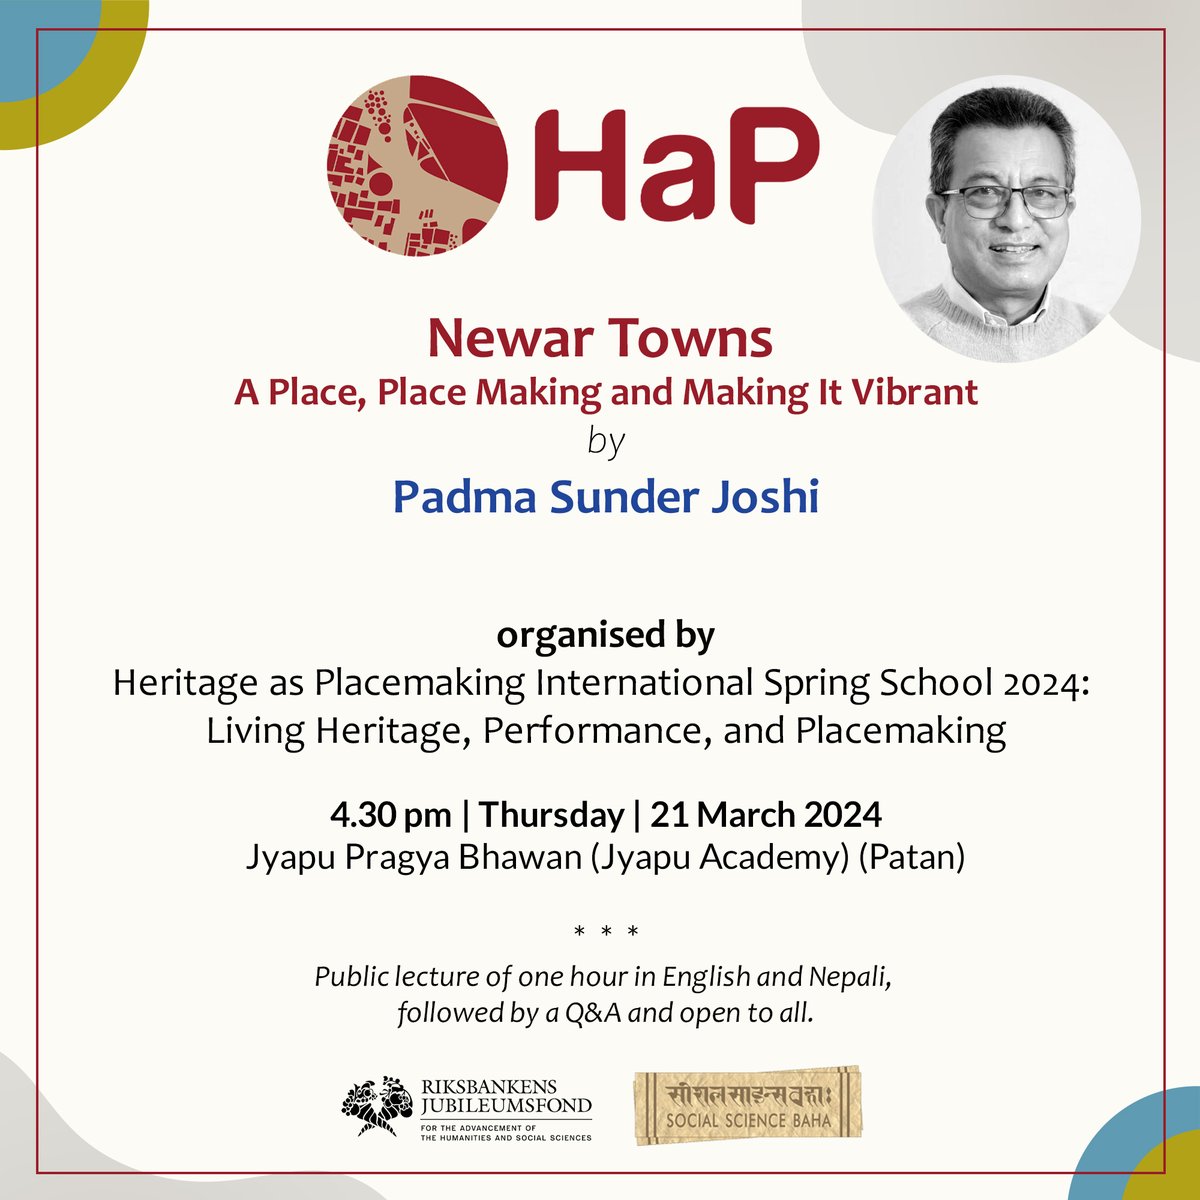 HaP at SSB cordially invites you to its public lecture titled 'Newar Towns: A Place, Place Making and Making It Vibrant' by Padma Sunder Joshi. The event will take place on 4.30pm, 21 March, 2024, at Jyapu Pragya Bhawan in Patan. For further detail: heritageasplacemaking.com/spring-school-…